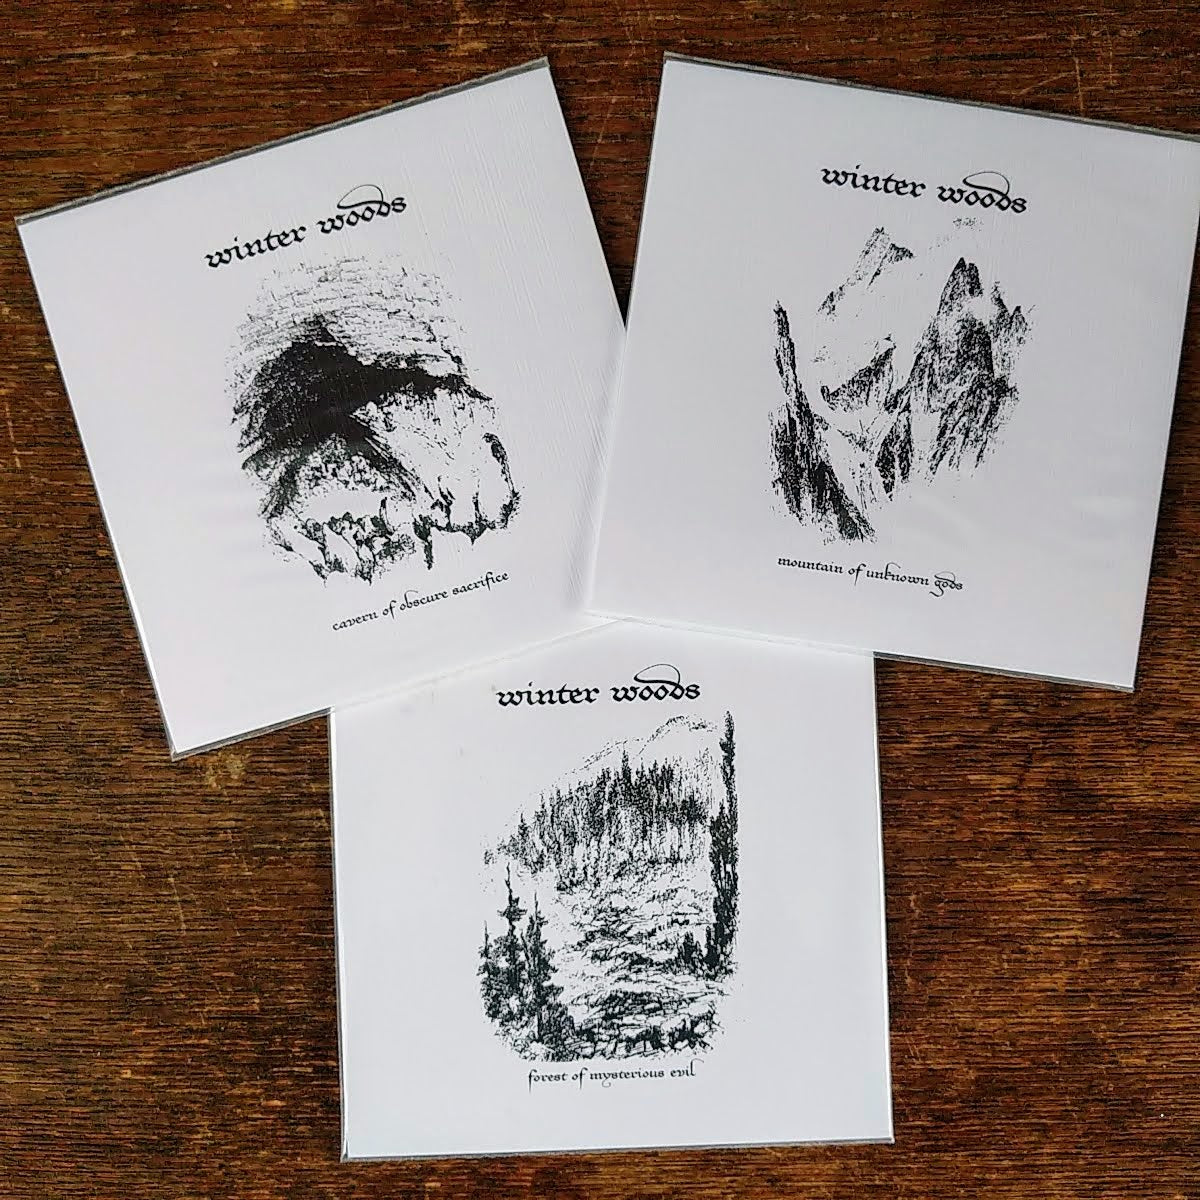 [SOLD OUT] WINTER WOODS "Forest / Mountain / Cavern" 3xCD set